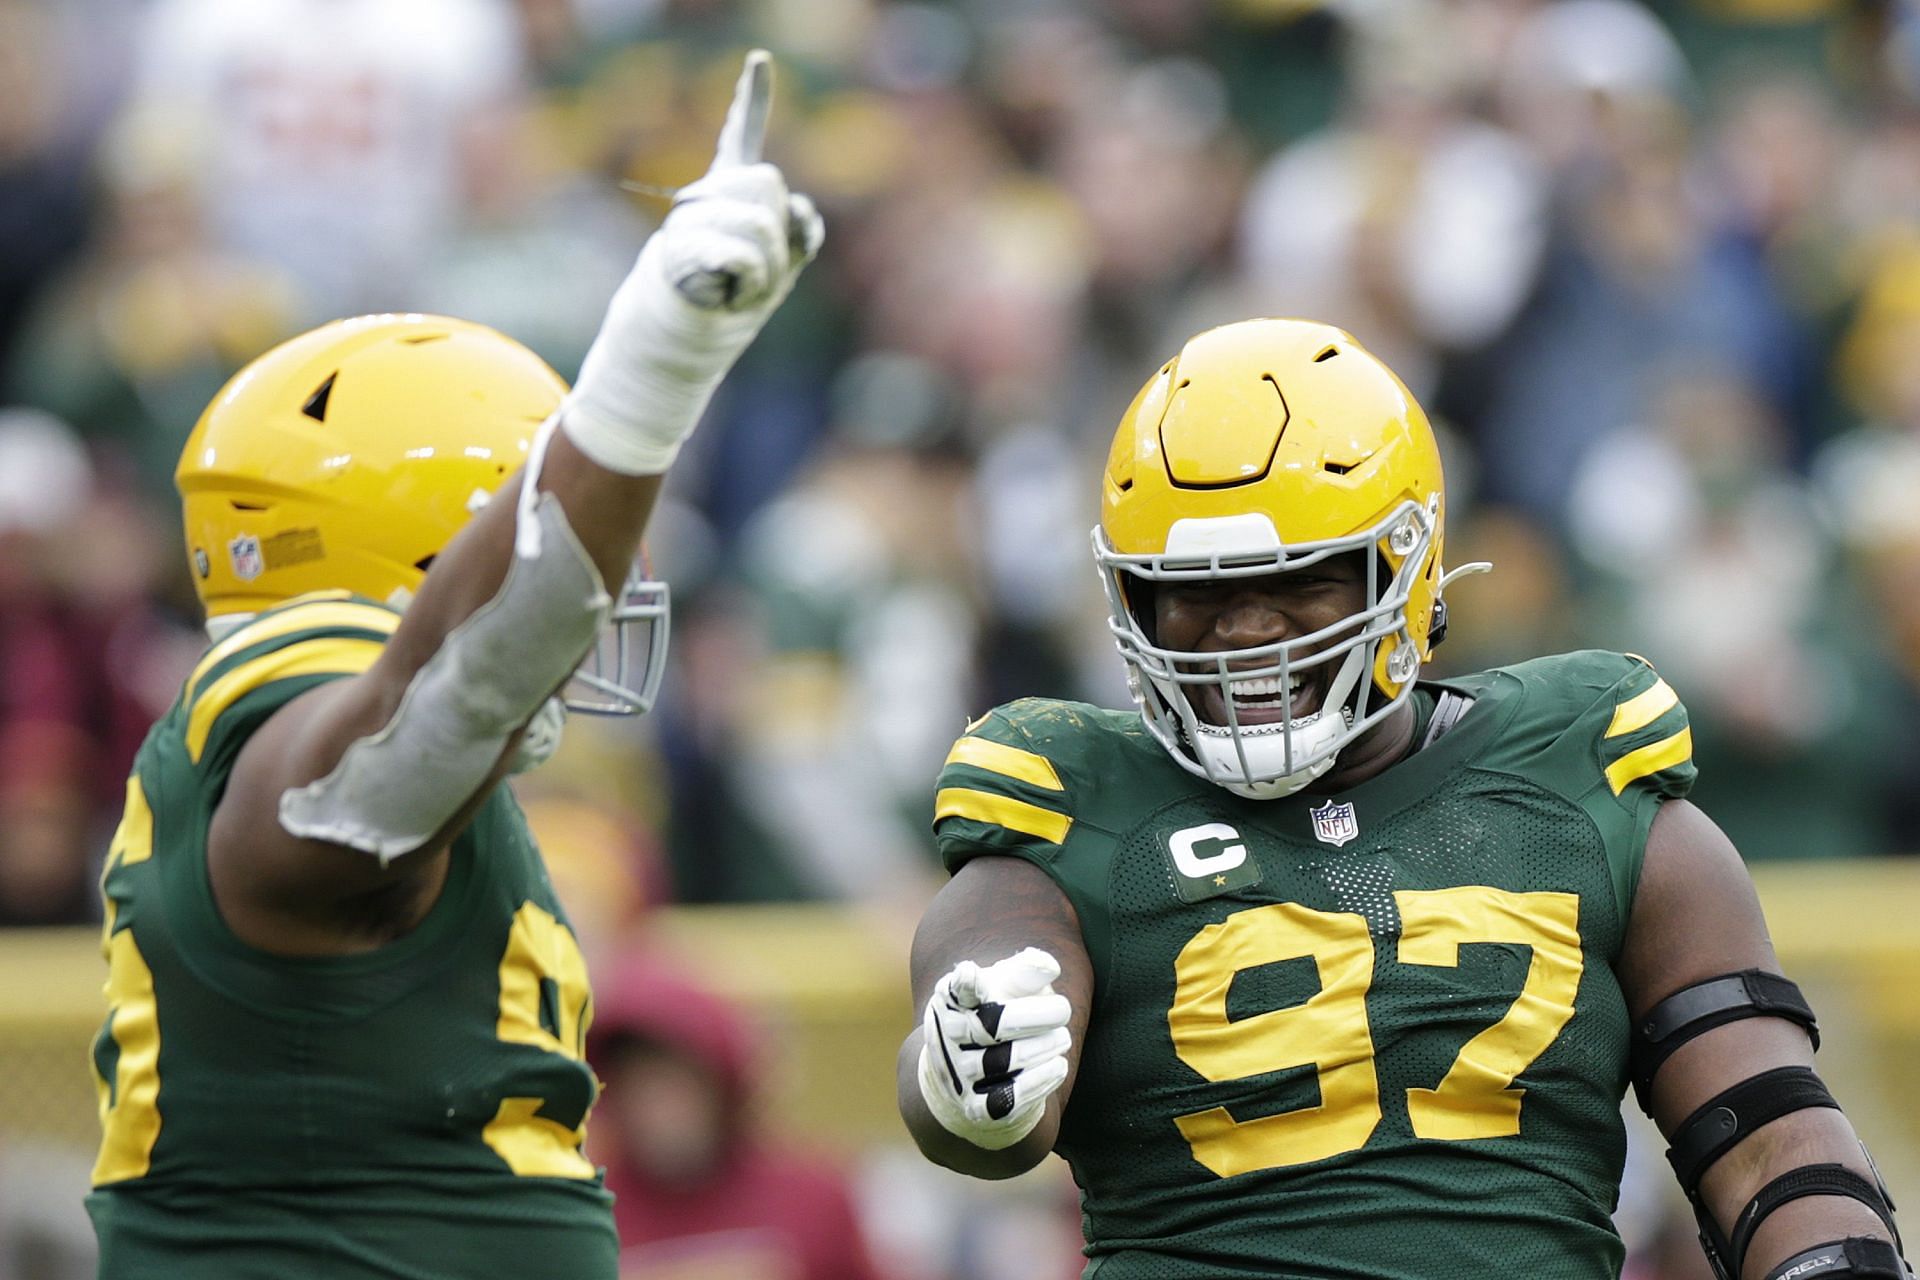 Kenny Clark celebrates with teammates after recording a sack in the fourth quarter against the Washington Football Team